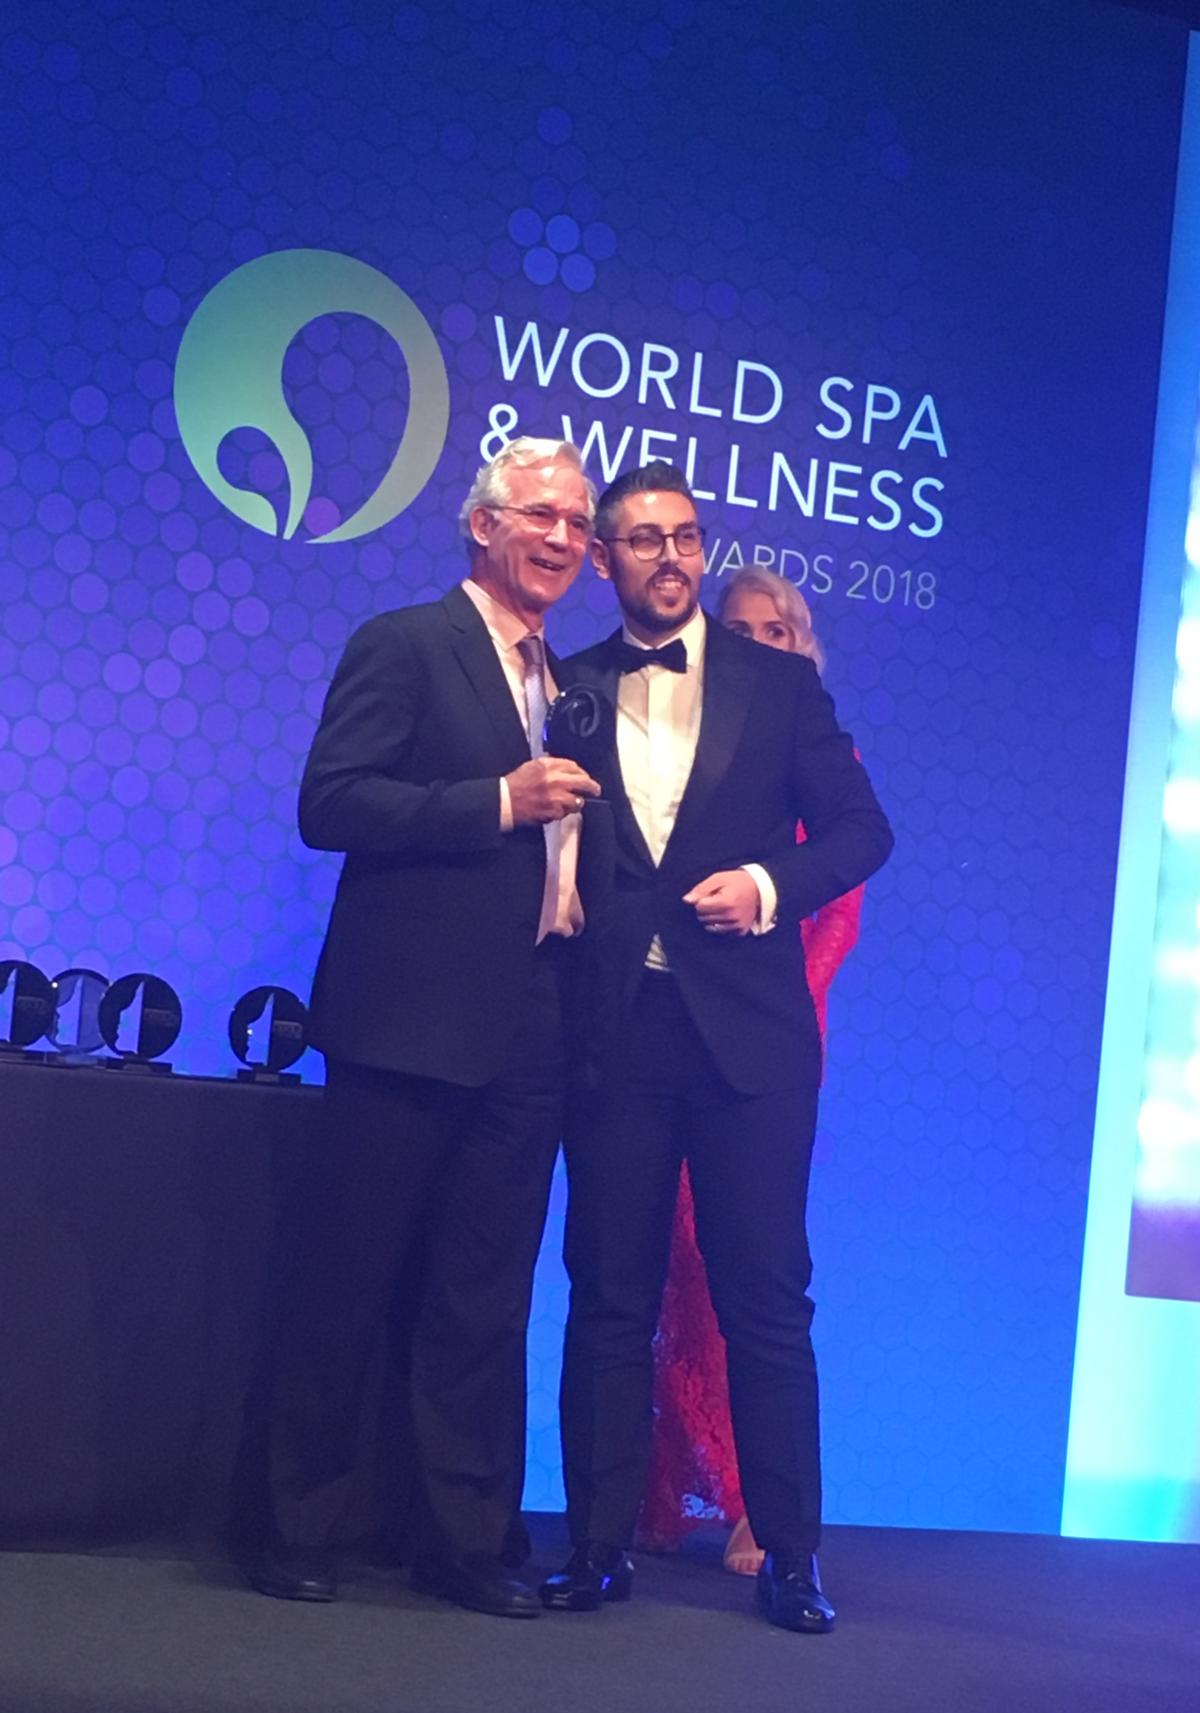 John Stewart, Kamalaya co-founder and chair (left), was in London to receive the award, which was presented to him by Matteo Brusaferri of Lemi Group (right) / Jane Kitchen